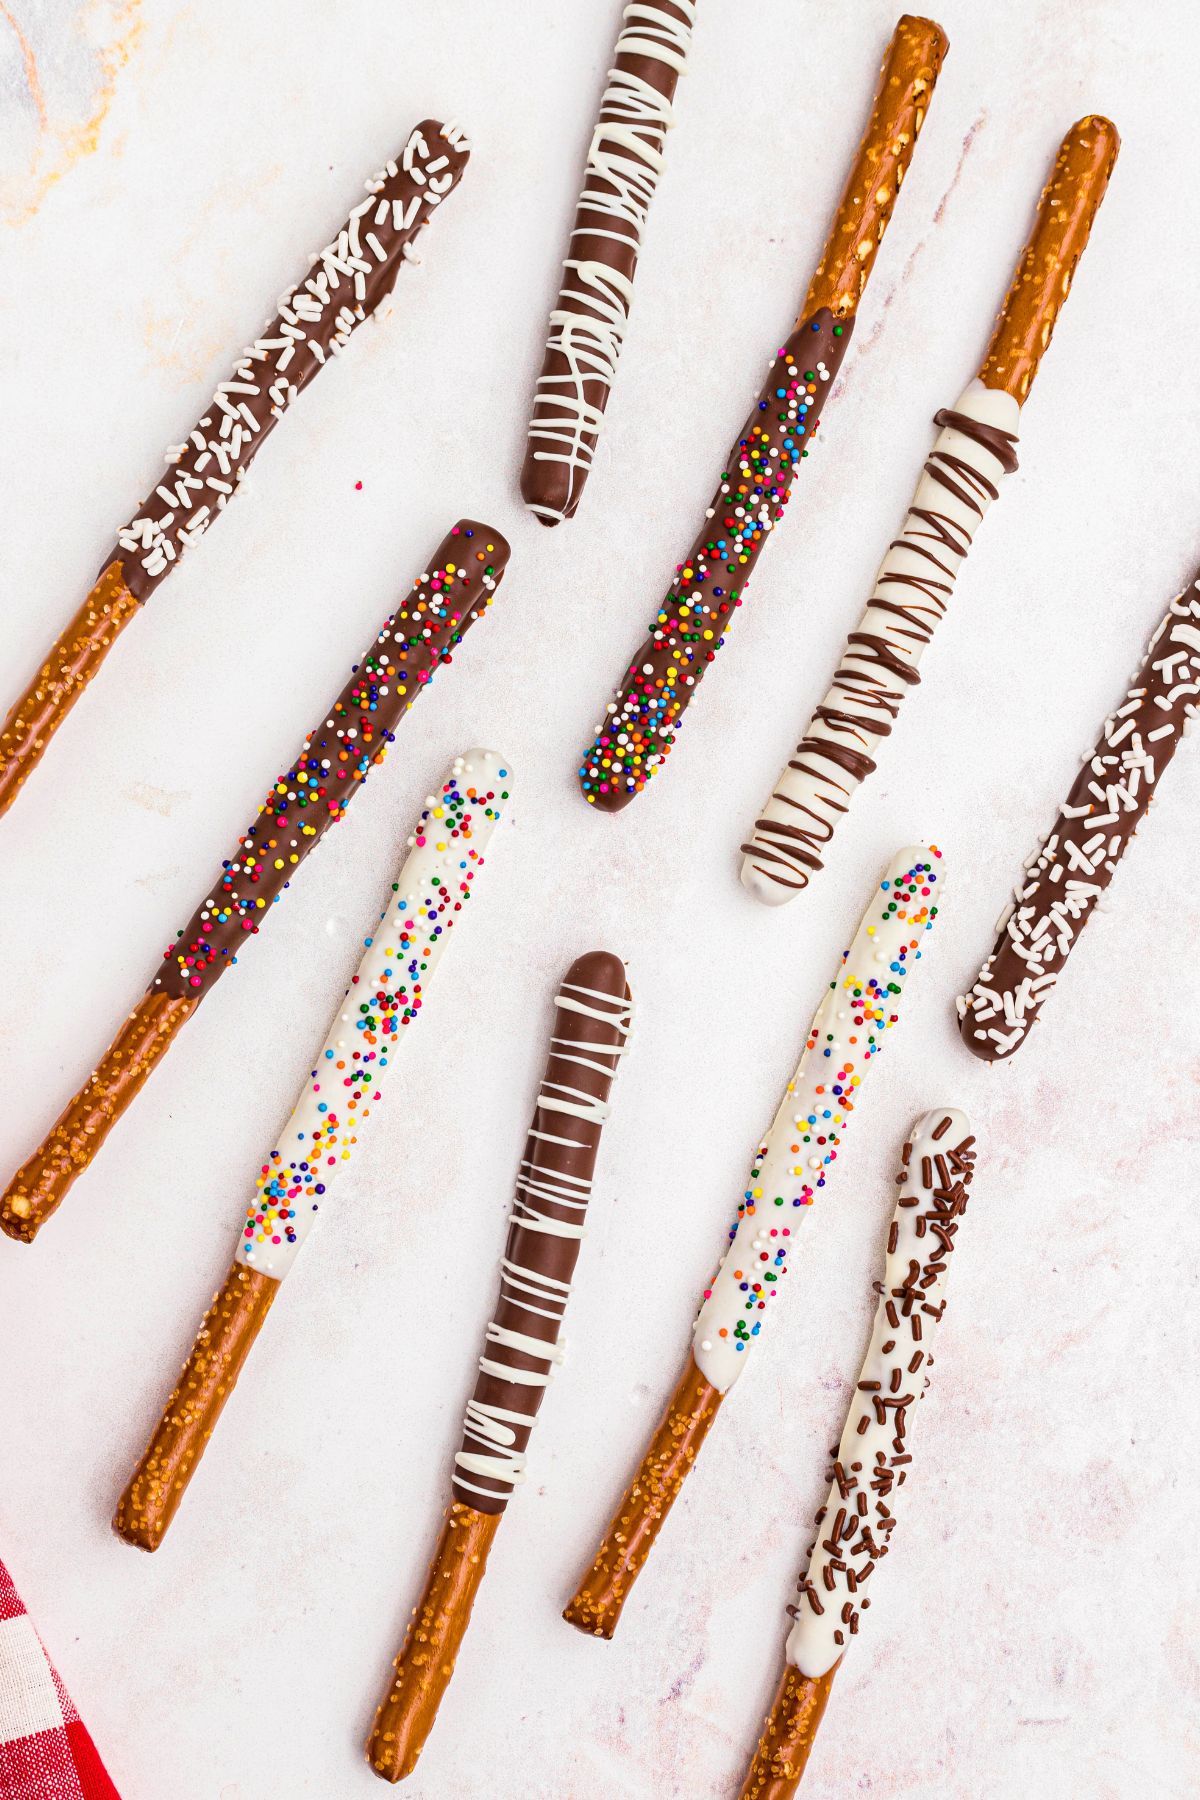 Pretzel rods drying on a marble table after being dipped in chocolate and white chocolate and coated in sprinkles. 